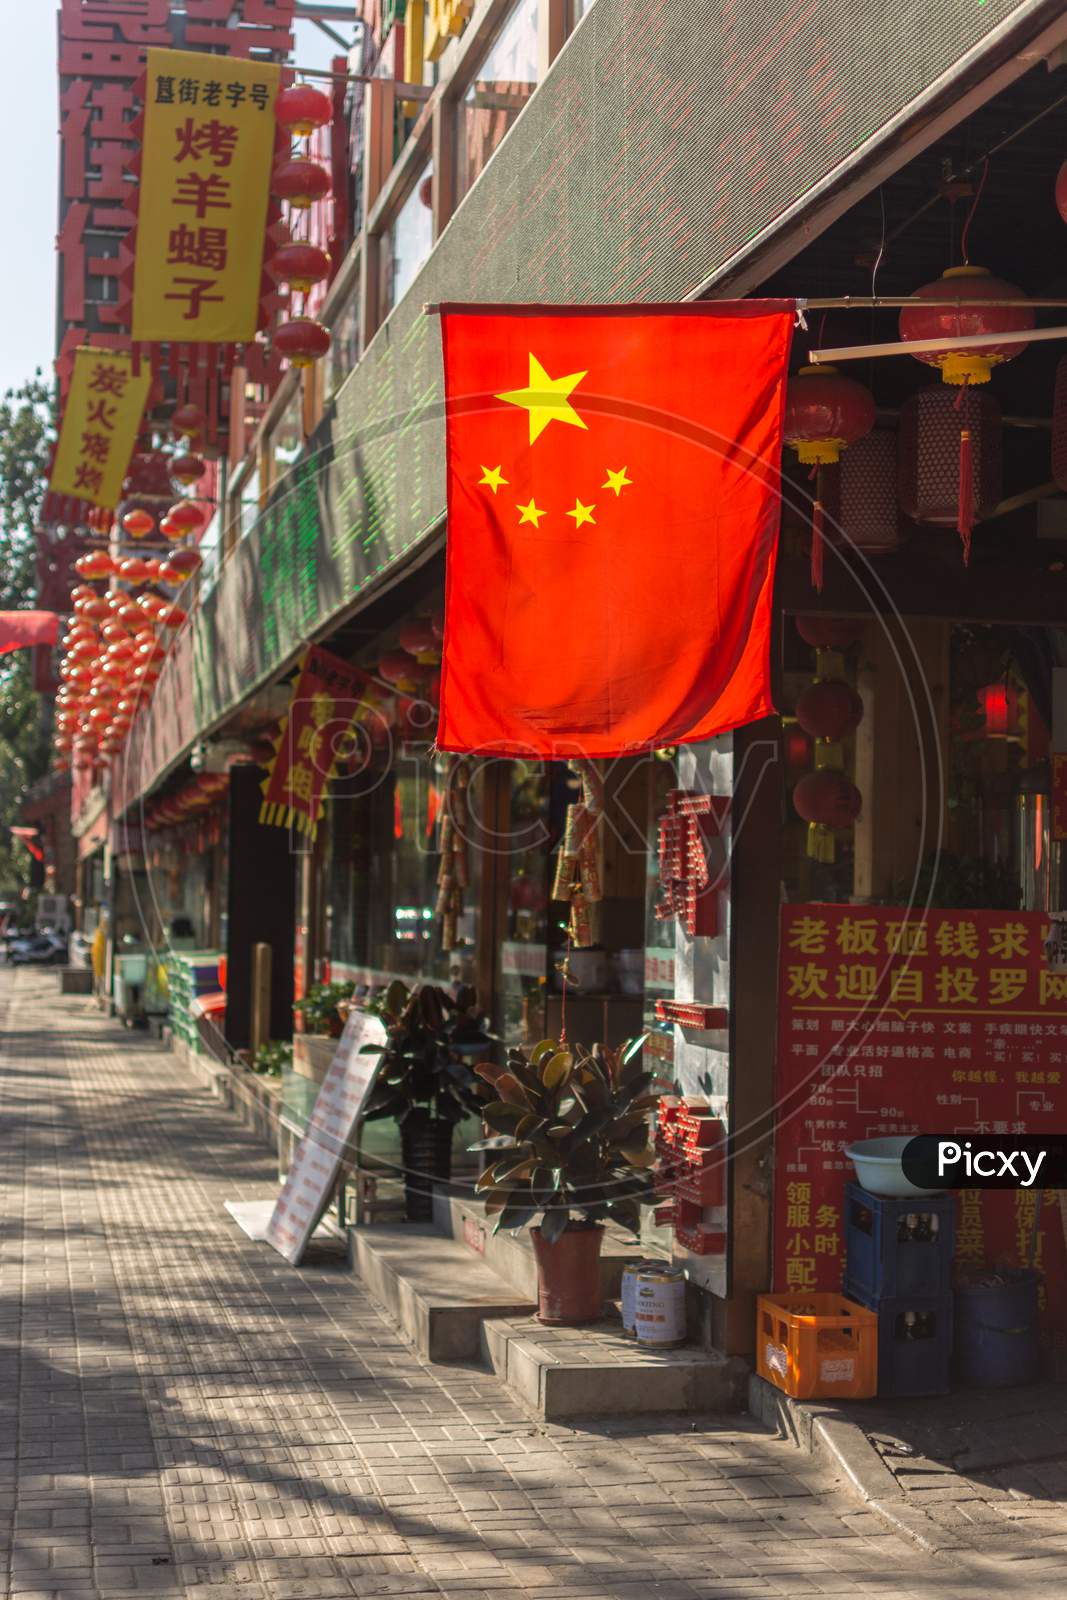 National Flag Of China In The Street In Beijing For National Day Of China